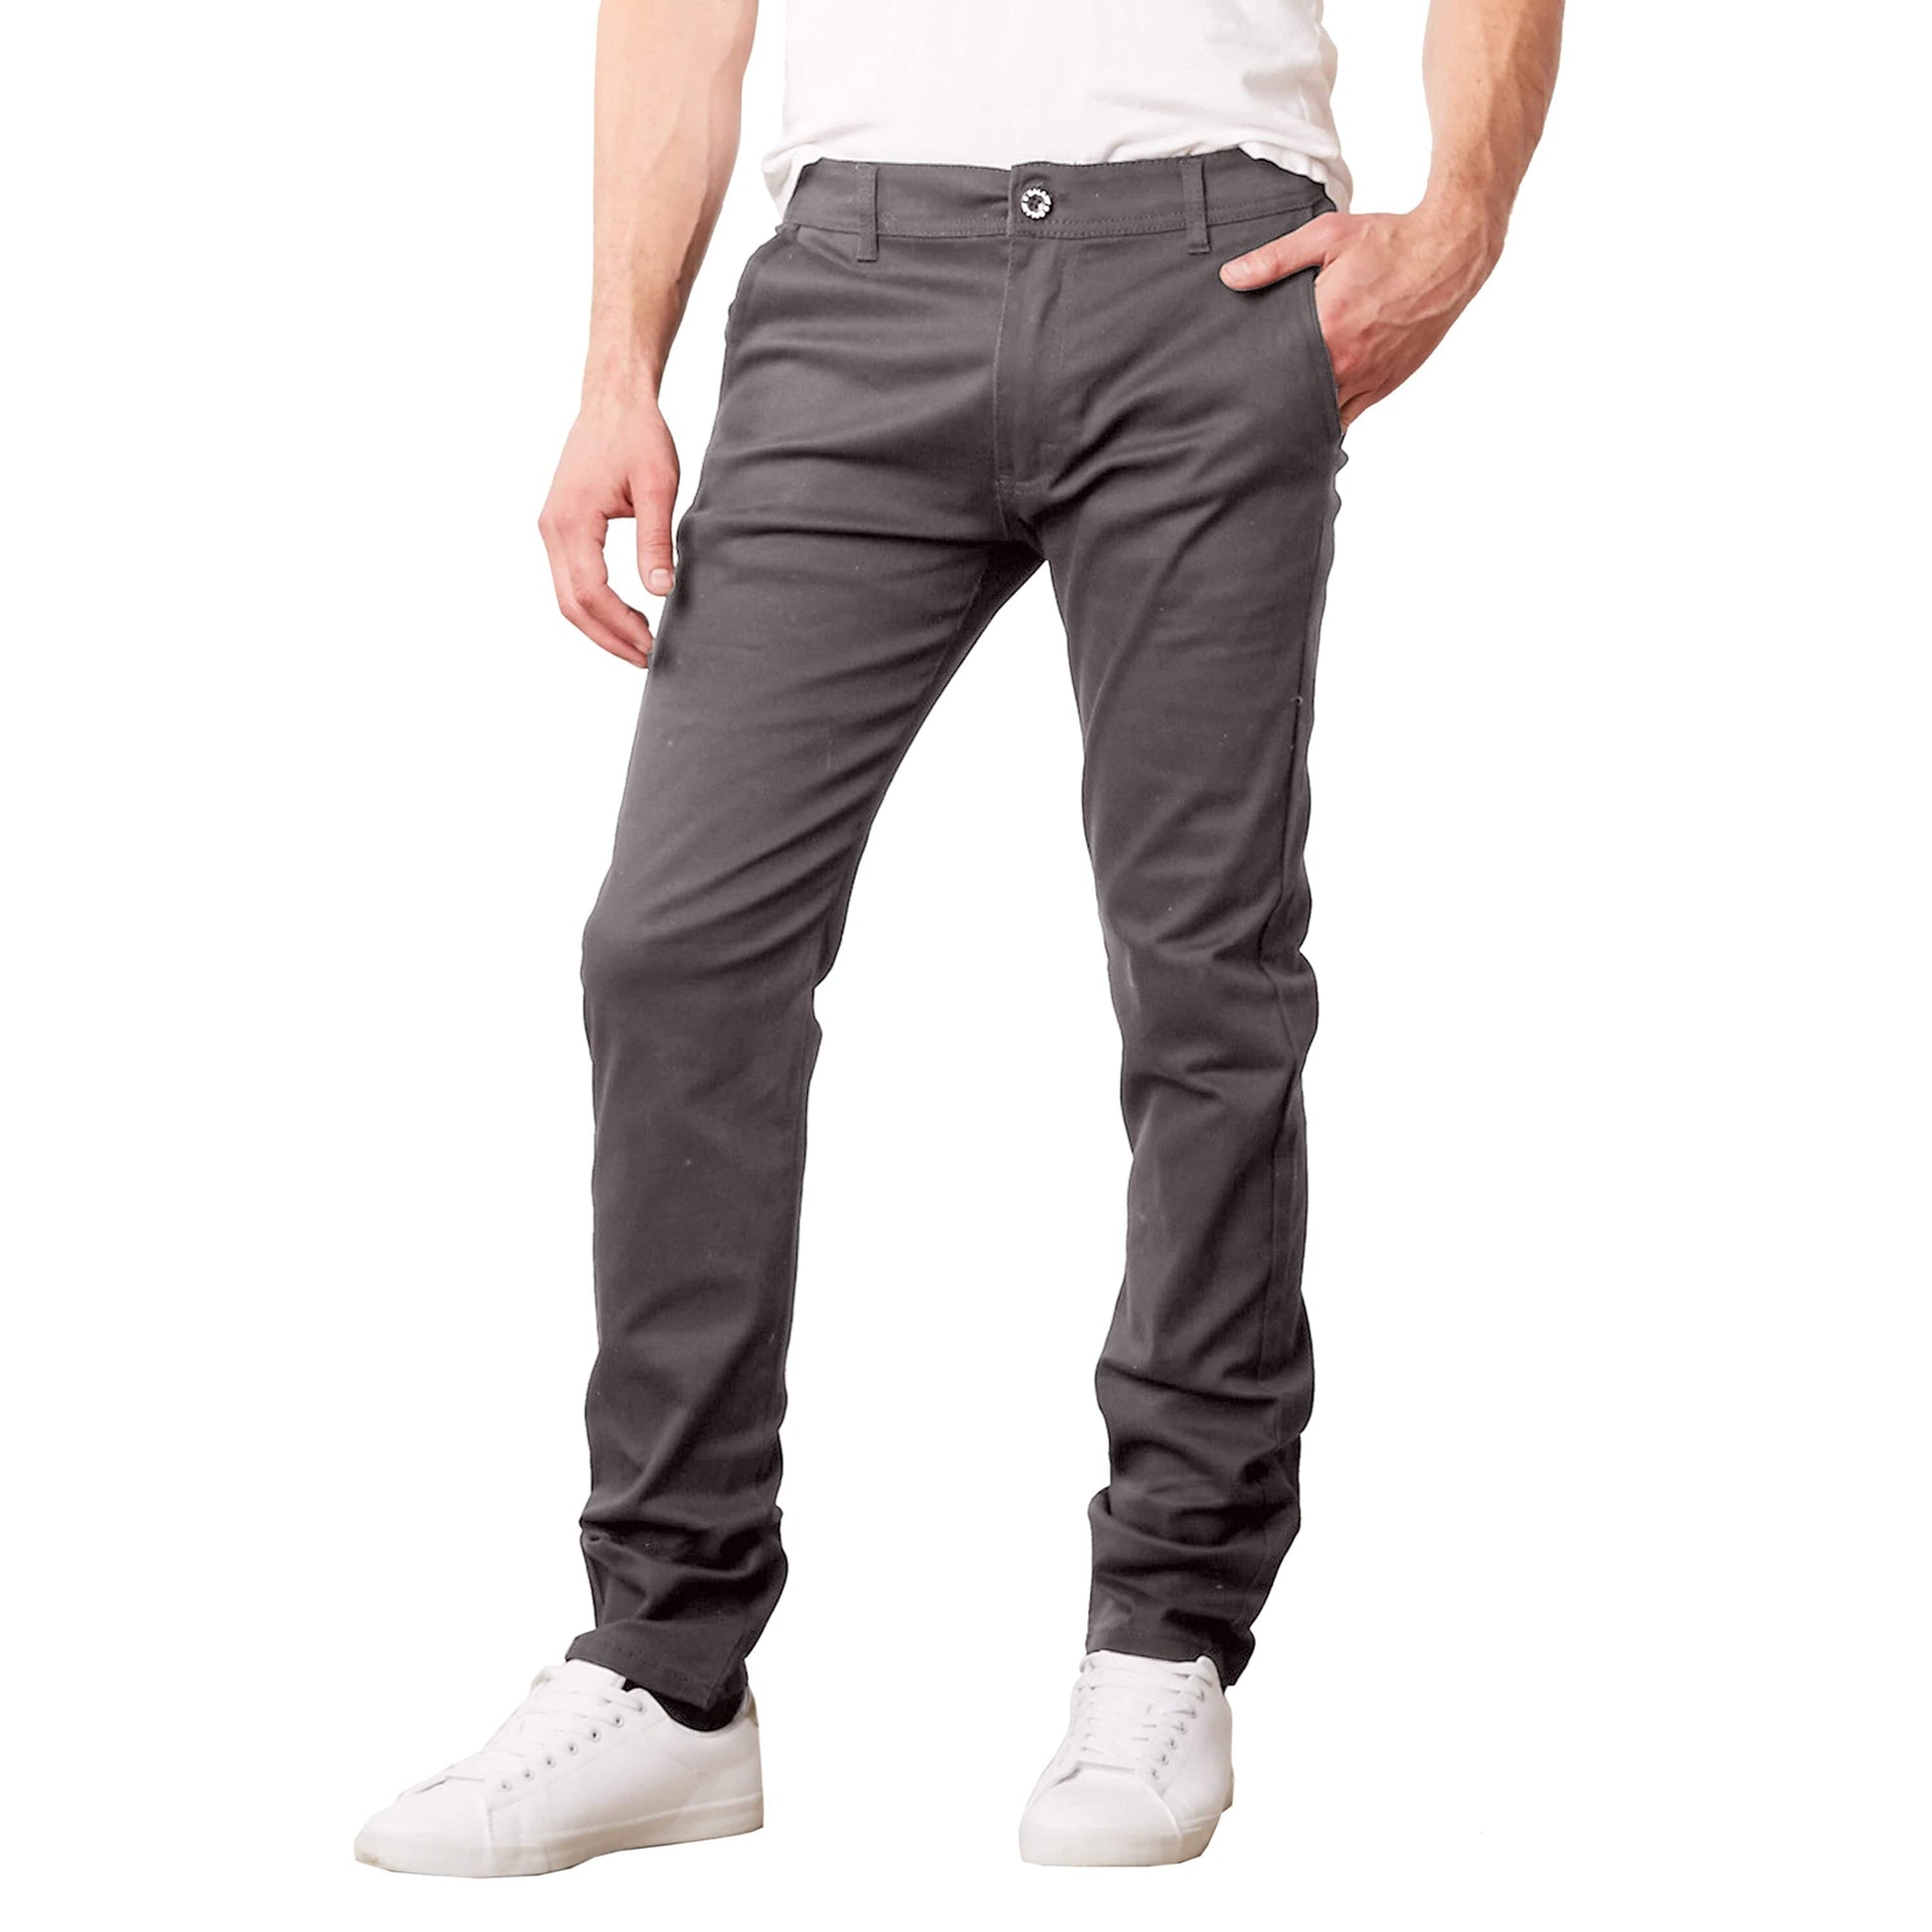 Slim fit chino stretch cotton trousers for men